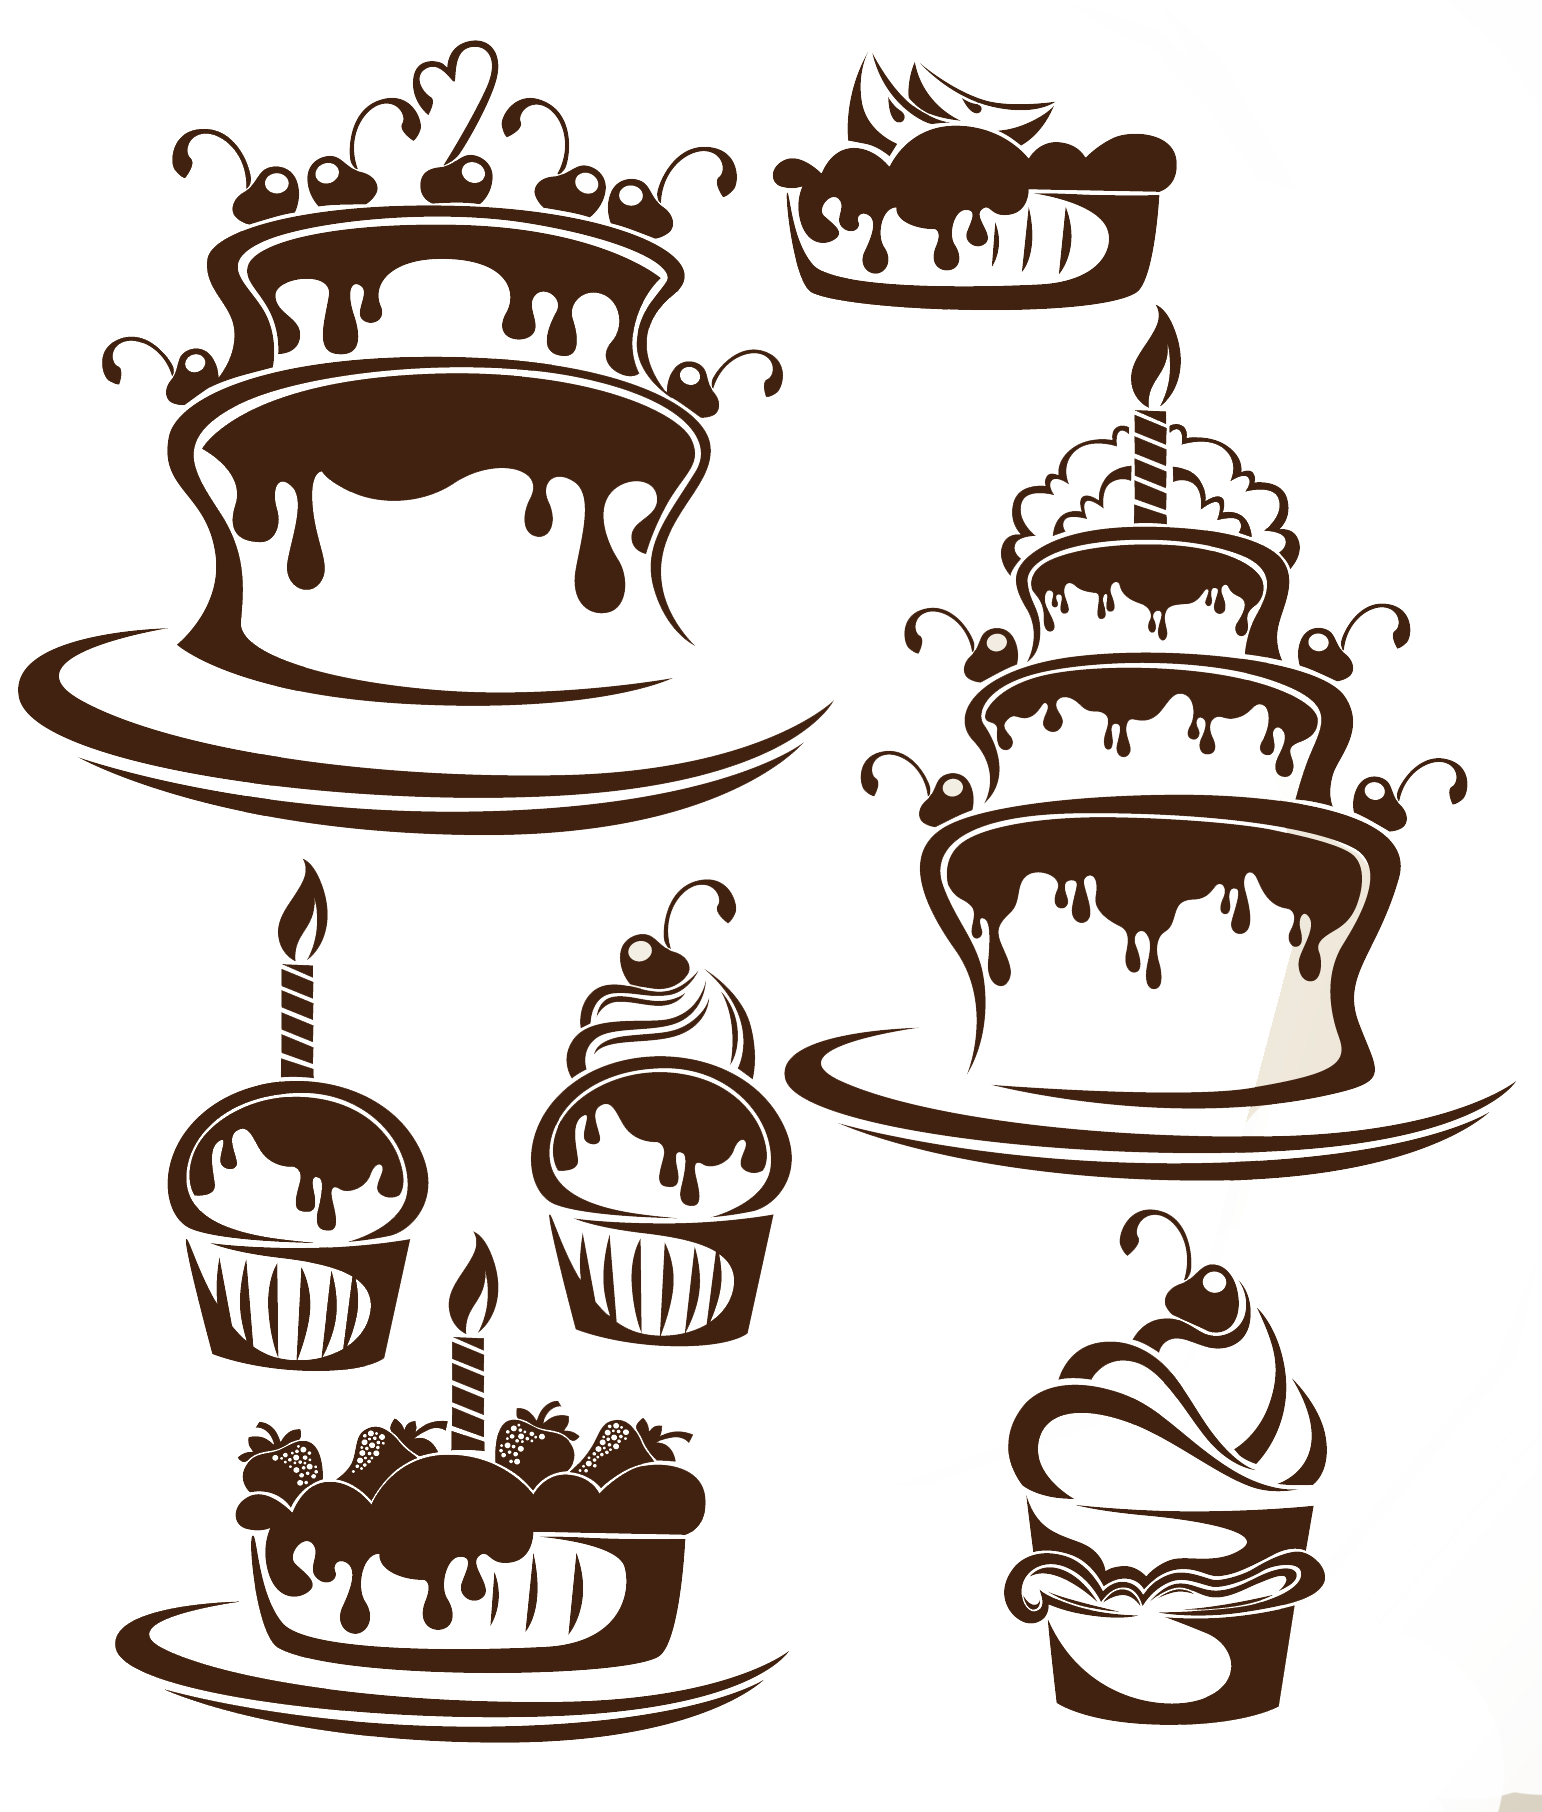 Cake Silhouette PNG And Vector Images Free Download  Pngtree